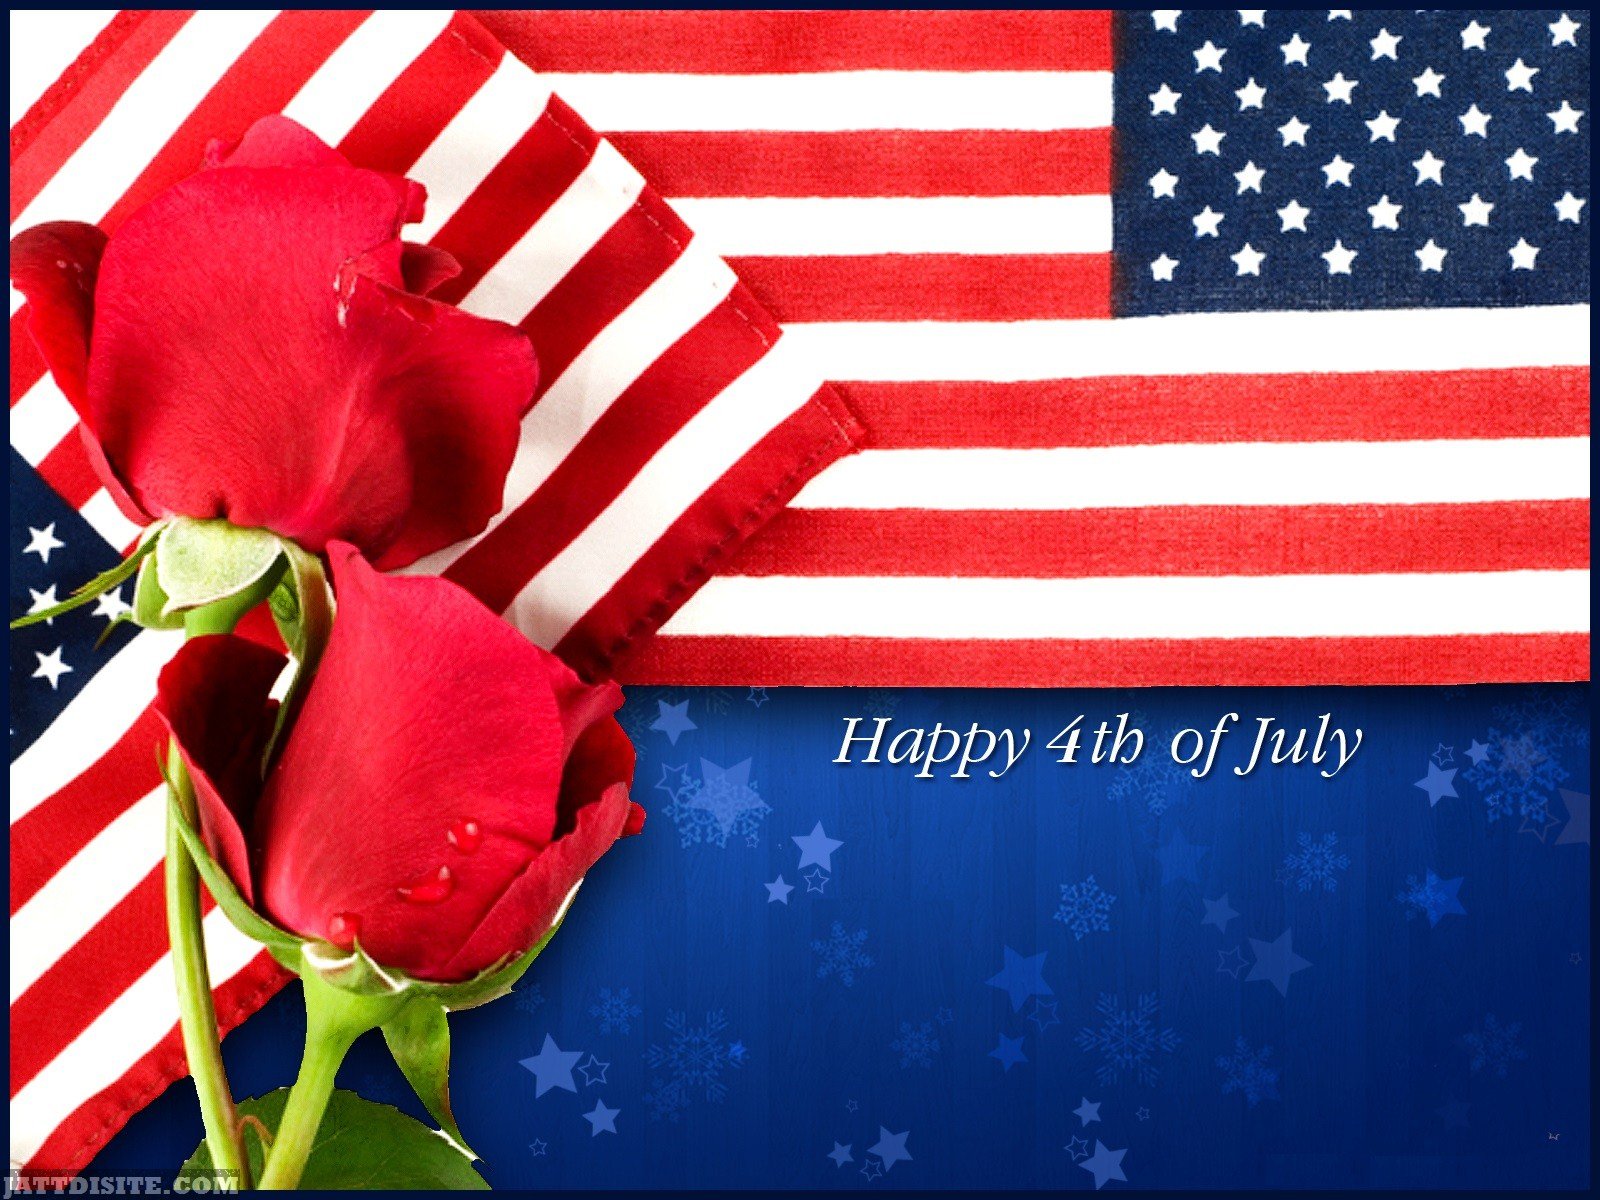 Free Happy Fourth Of July Images The fourth day of july is referred